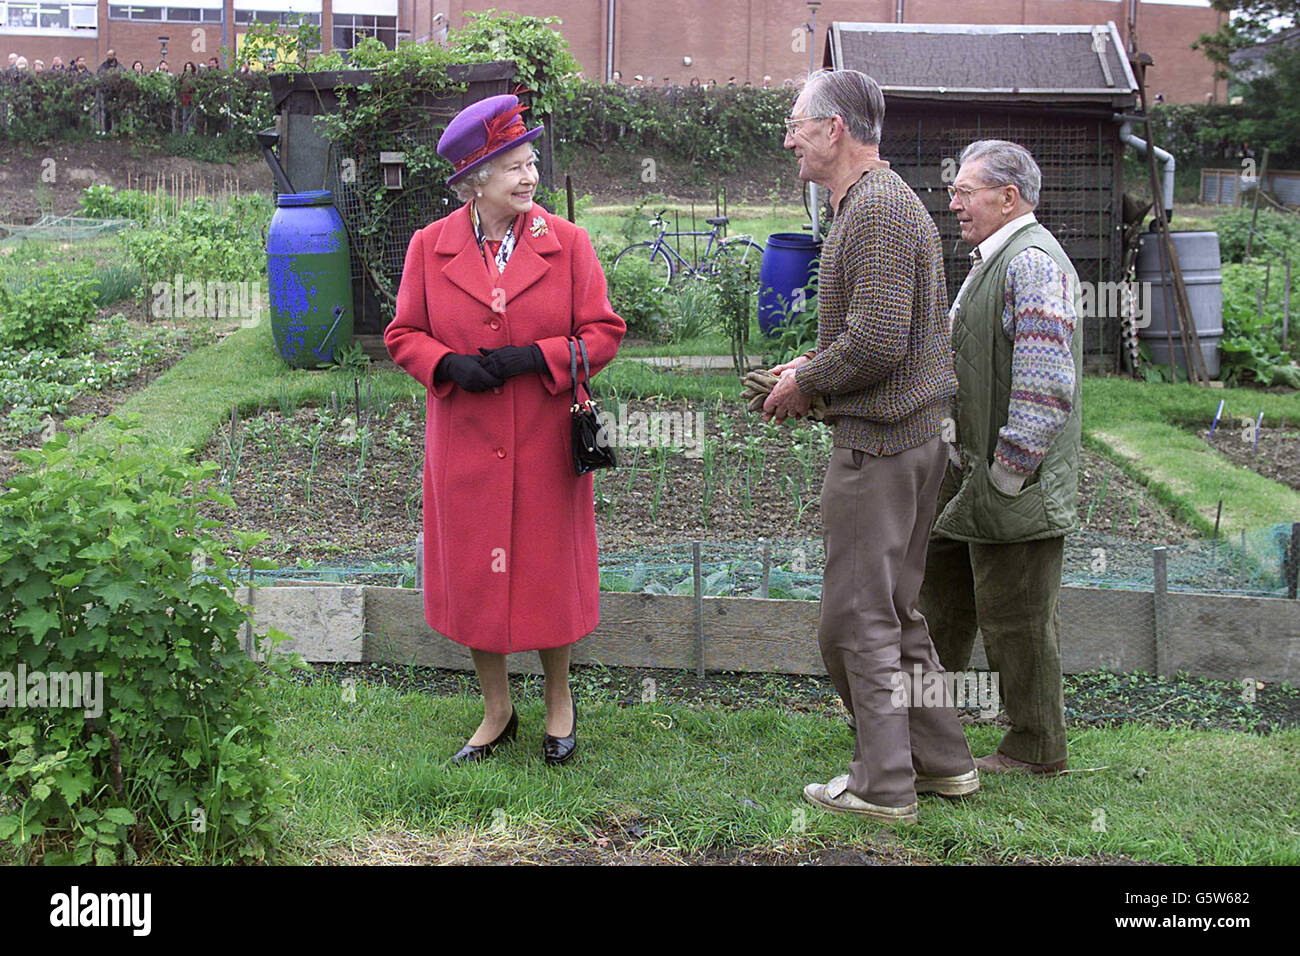 Queen Elizabeth II talks to gardening enthusiasts Donald Doody (right) and John Harrison on their allotment in Redbridge Lane West, during her Golden Jubilee visit to East London. 07/08/02 : Queen Elizabeth II talking to gardening enthusiasts Donald Doody (right) and John Harrison on their allotment in Redbridge Lane West, during her Golden Jubilee visit to East London. According to a 'factfile' released by Buckingham Palace during her Jubilee year the Queen was given hampers of locally produced in Cornwall, Somerset, Suffolk and Powys. Stock Photo